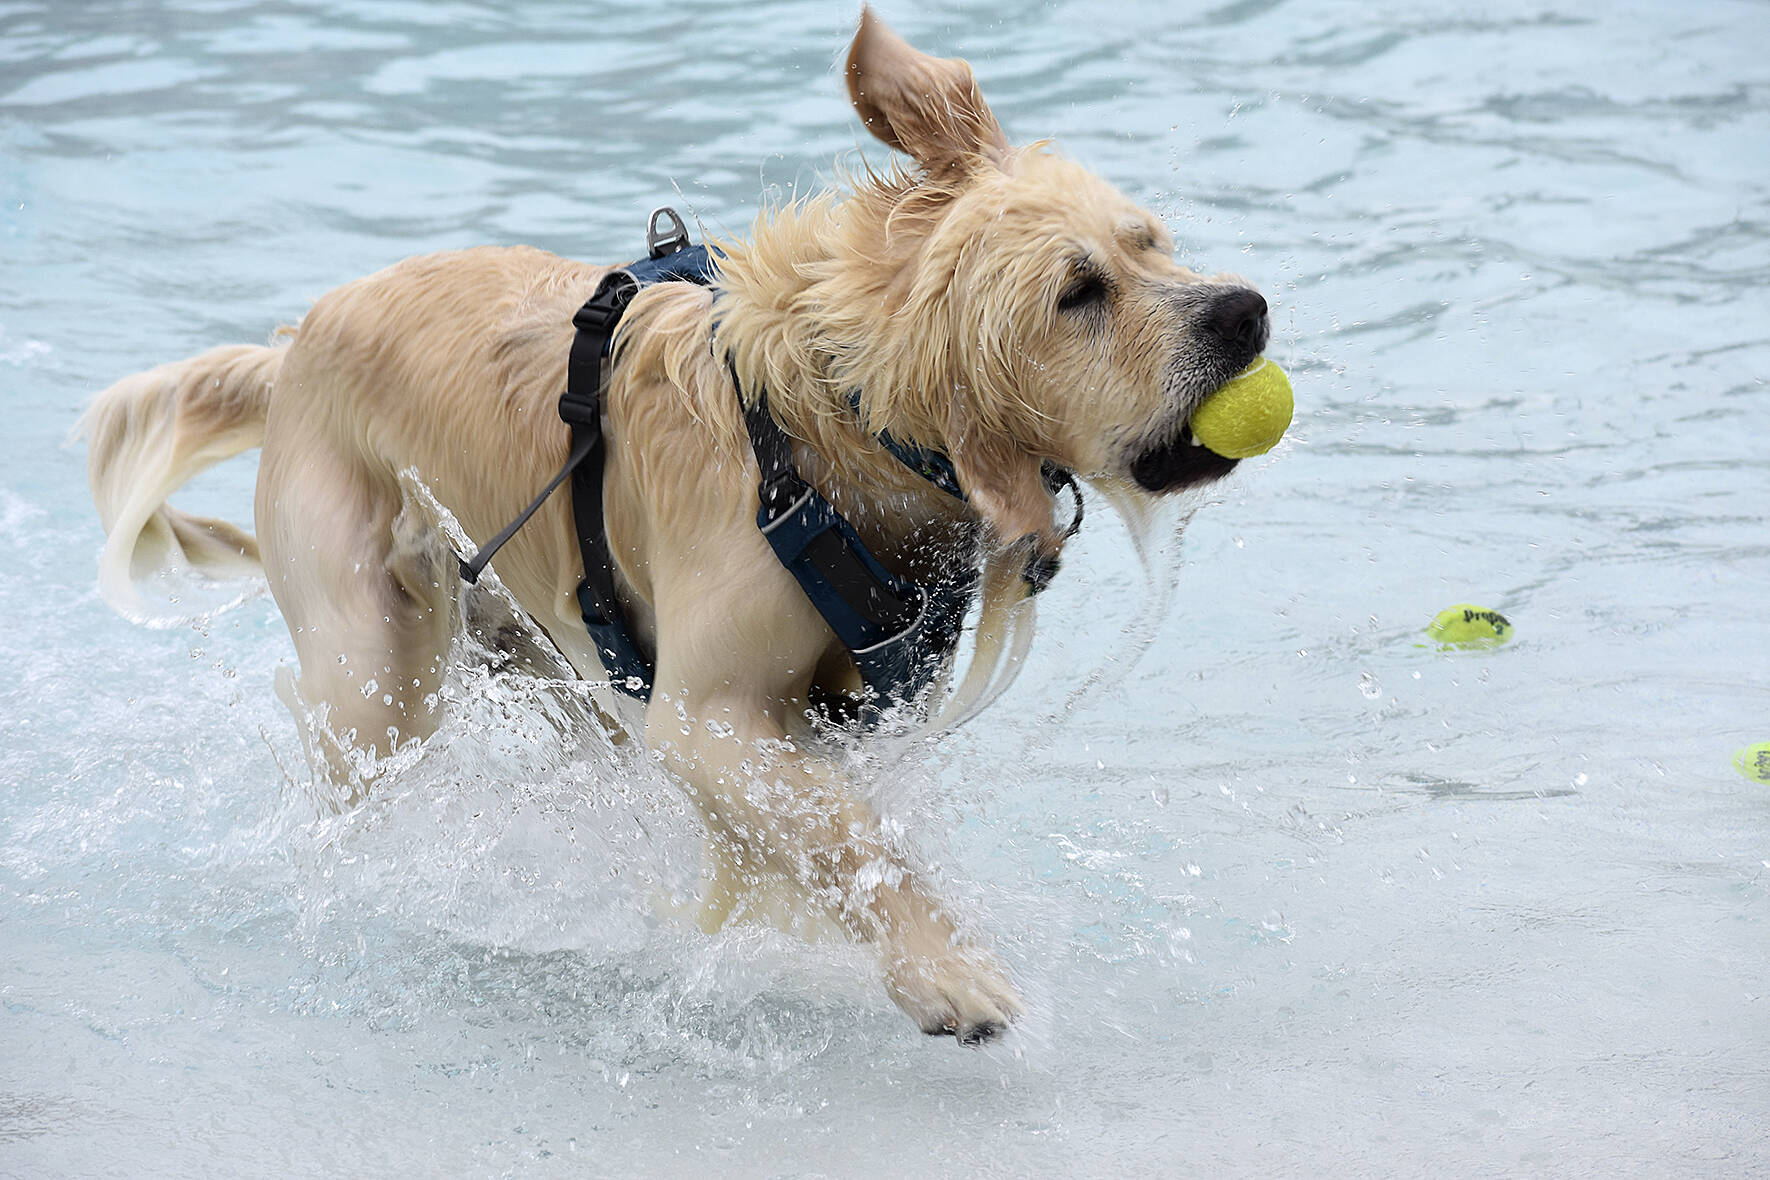 Photo by Haley Ausbun. The Henry Moses Aquatic Center wrapped up the season with a splash— from local pups! The Pooch Plunge gave dogs free reign of the lazy river and wave pool, Saturday, Sept. 7 2019.